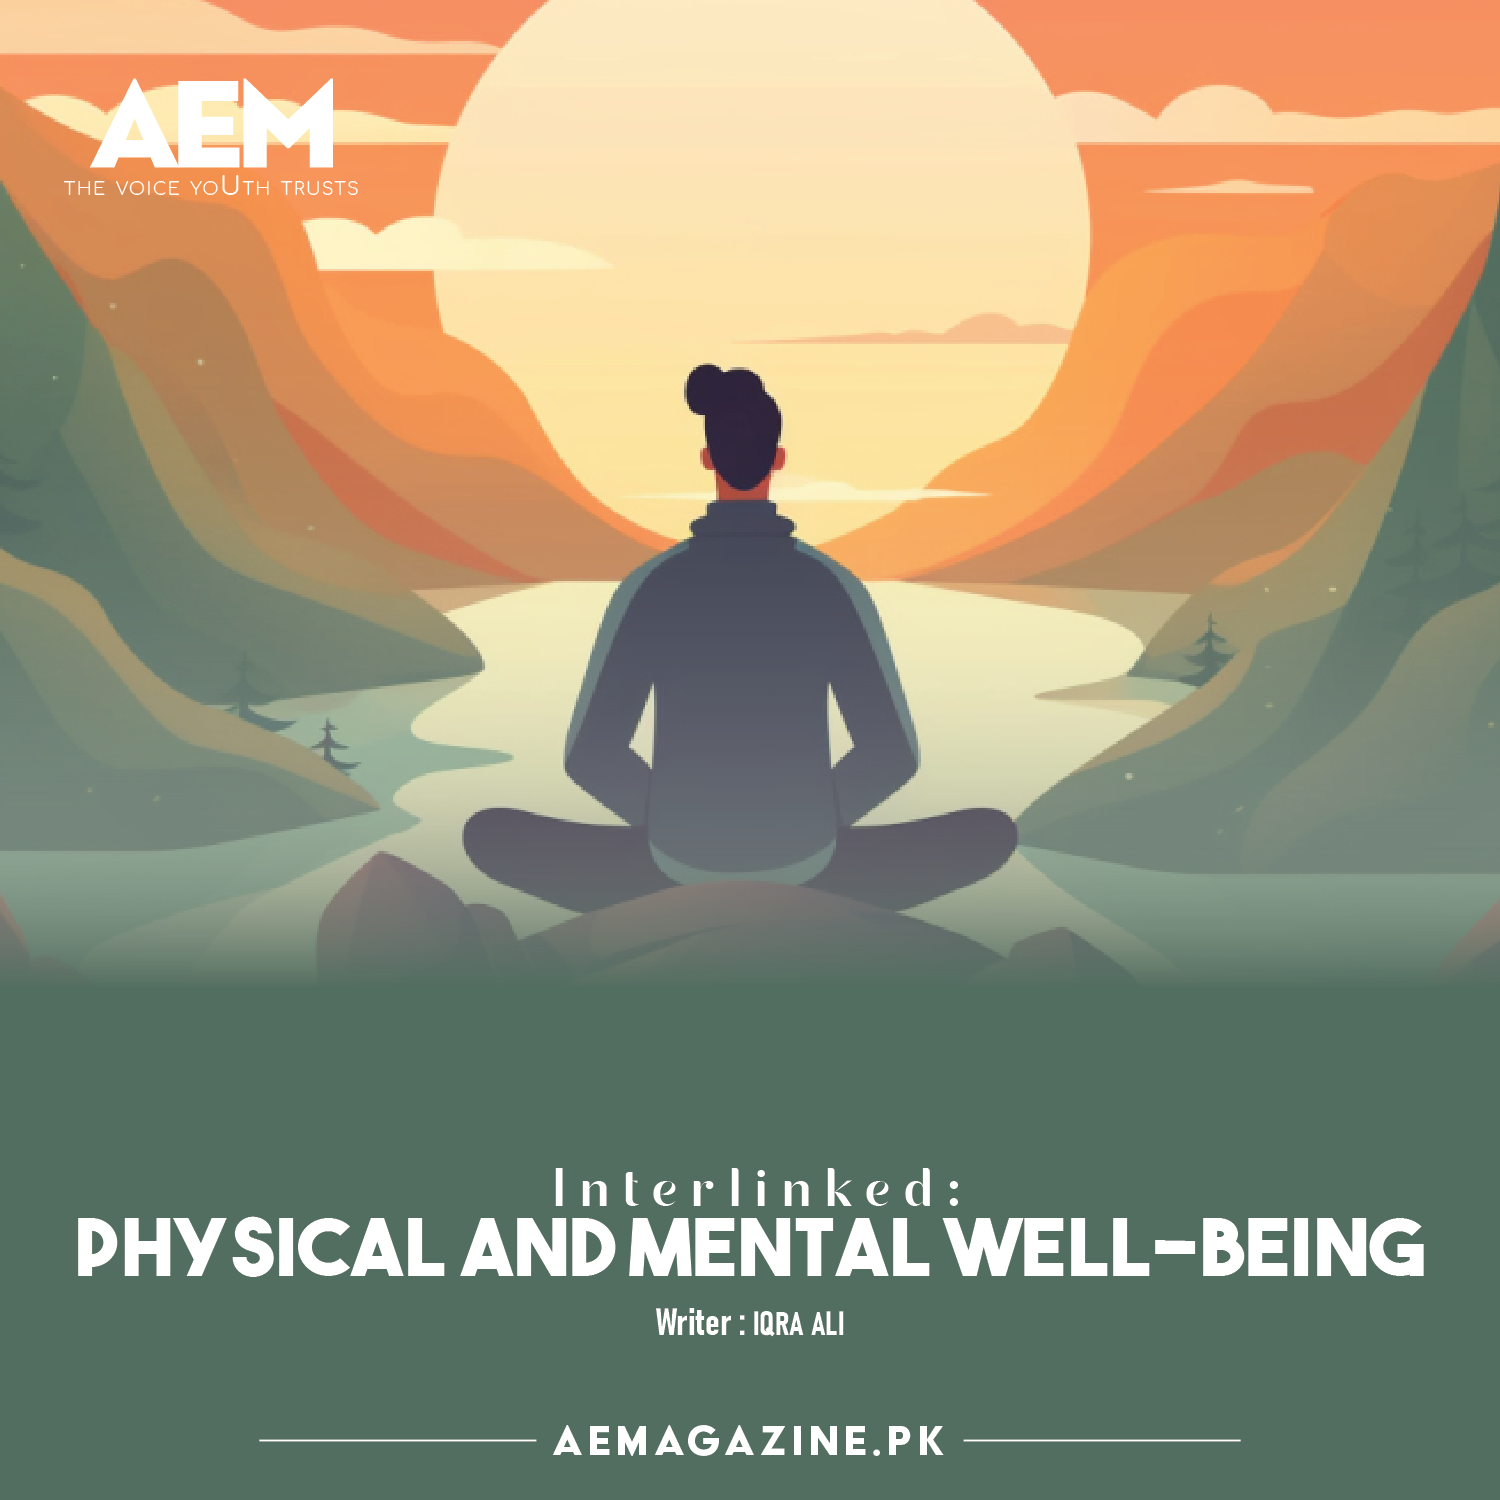 Interlinked: Physical and Mental Well-Being